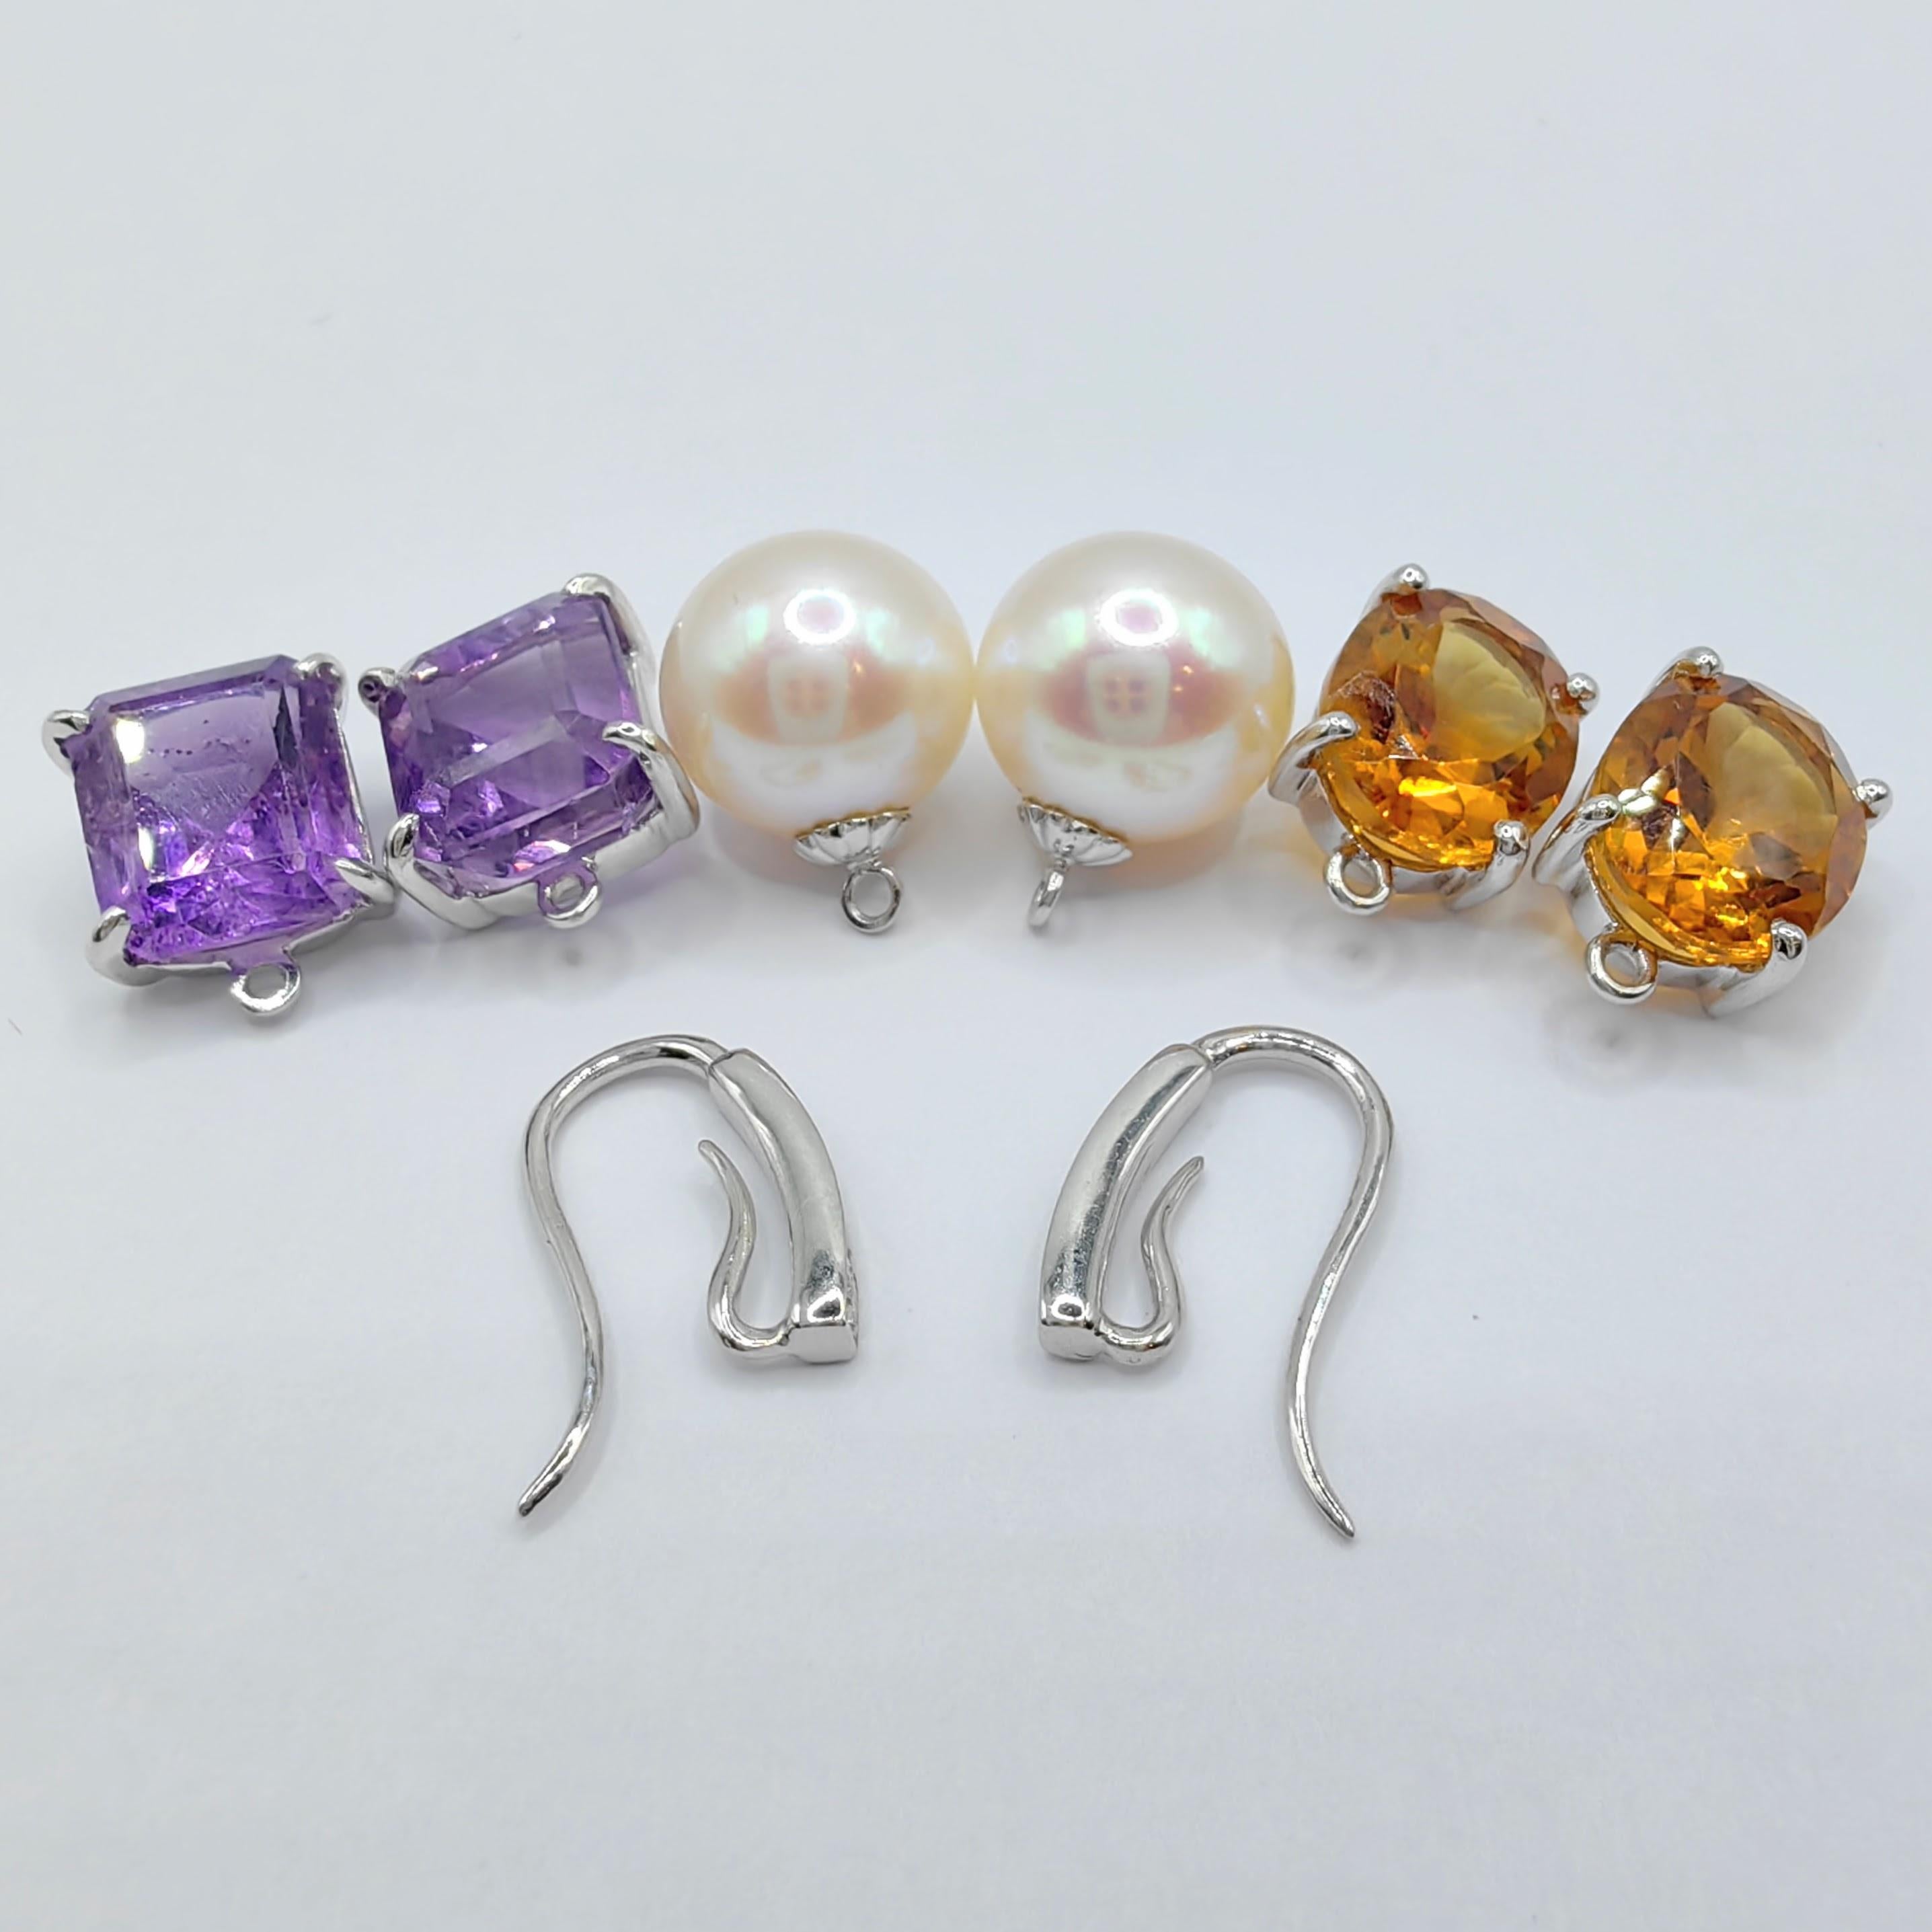 Round Cut 3-in-1 Amethyst/Citrine/Pearl Diamond 18K White Gold Drop Earrings Gift Set For Sale